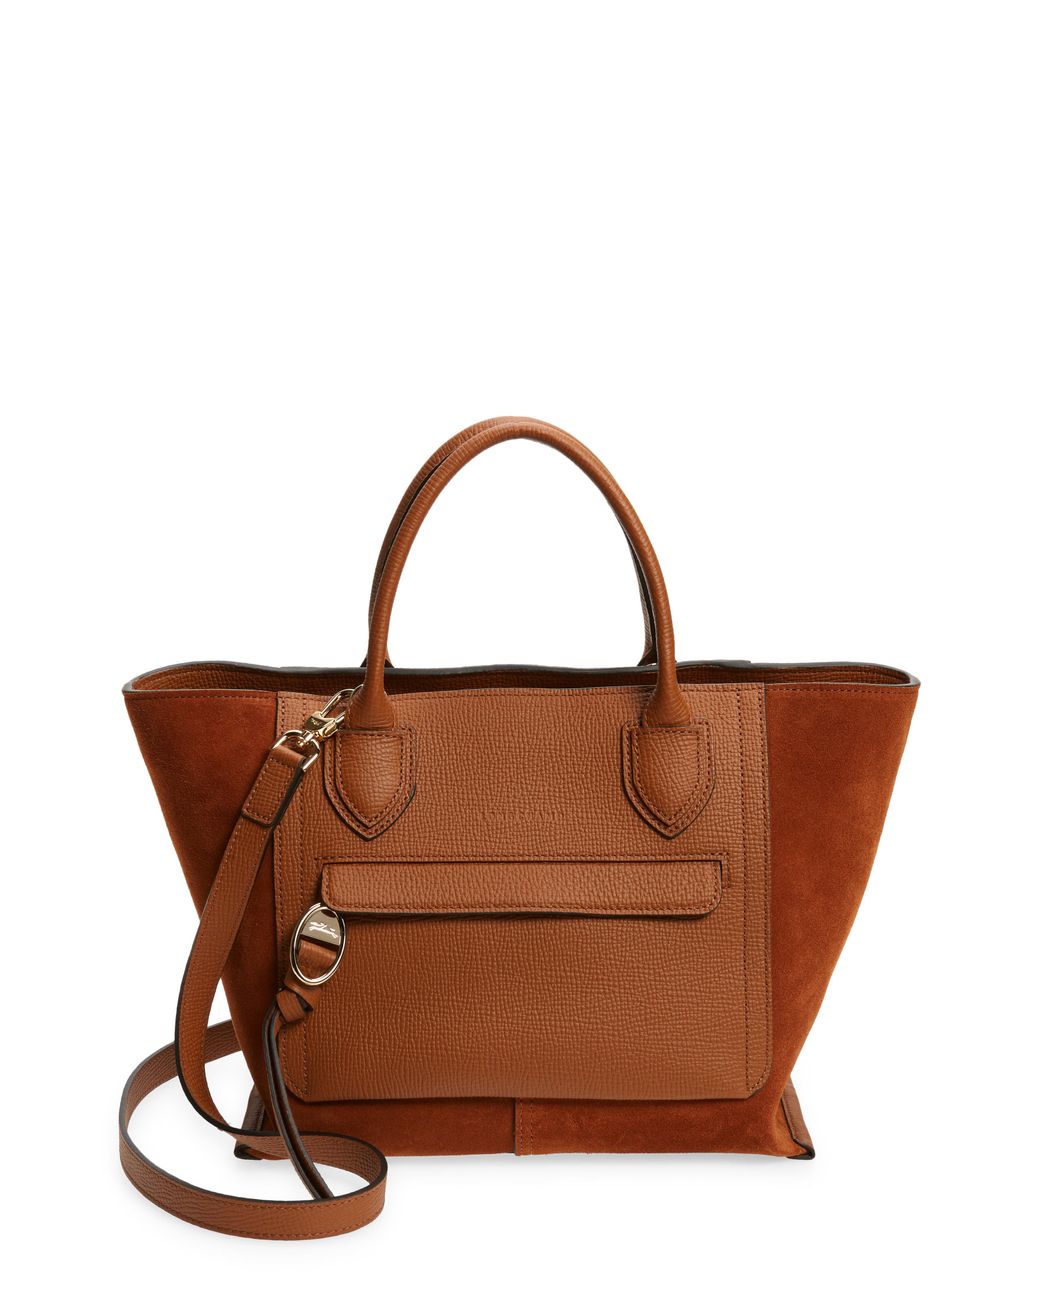 Longchamp Medium Mailbox Suede & Leather Top Handle Bag in Brown | Lyst